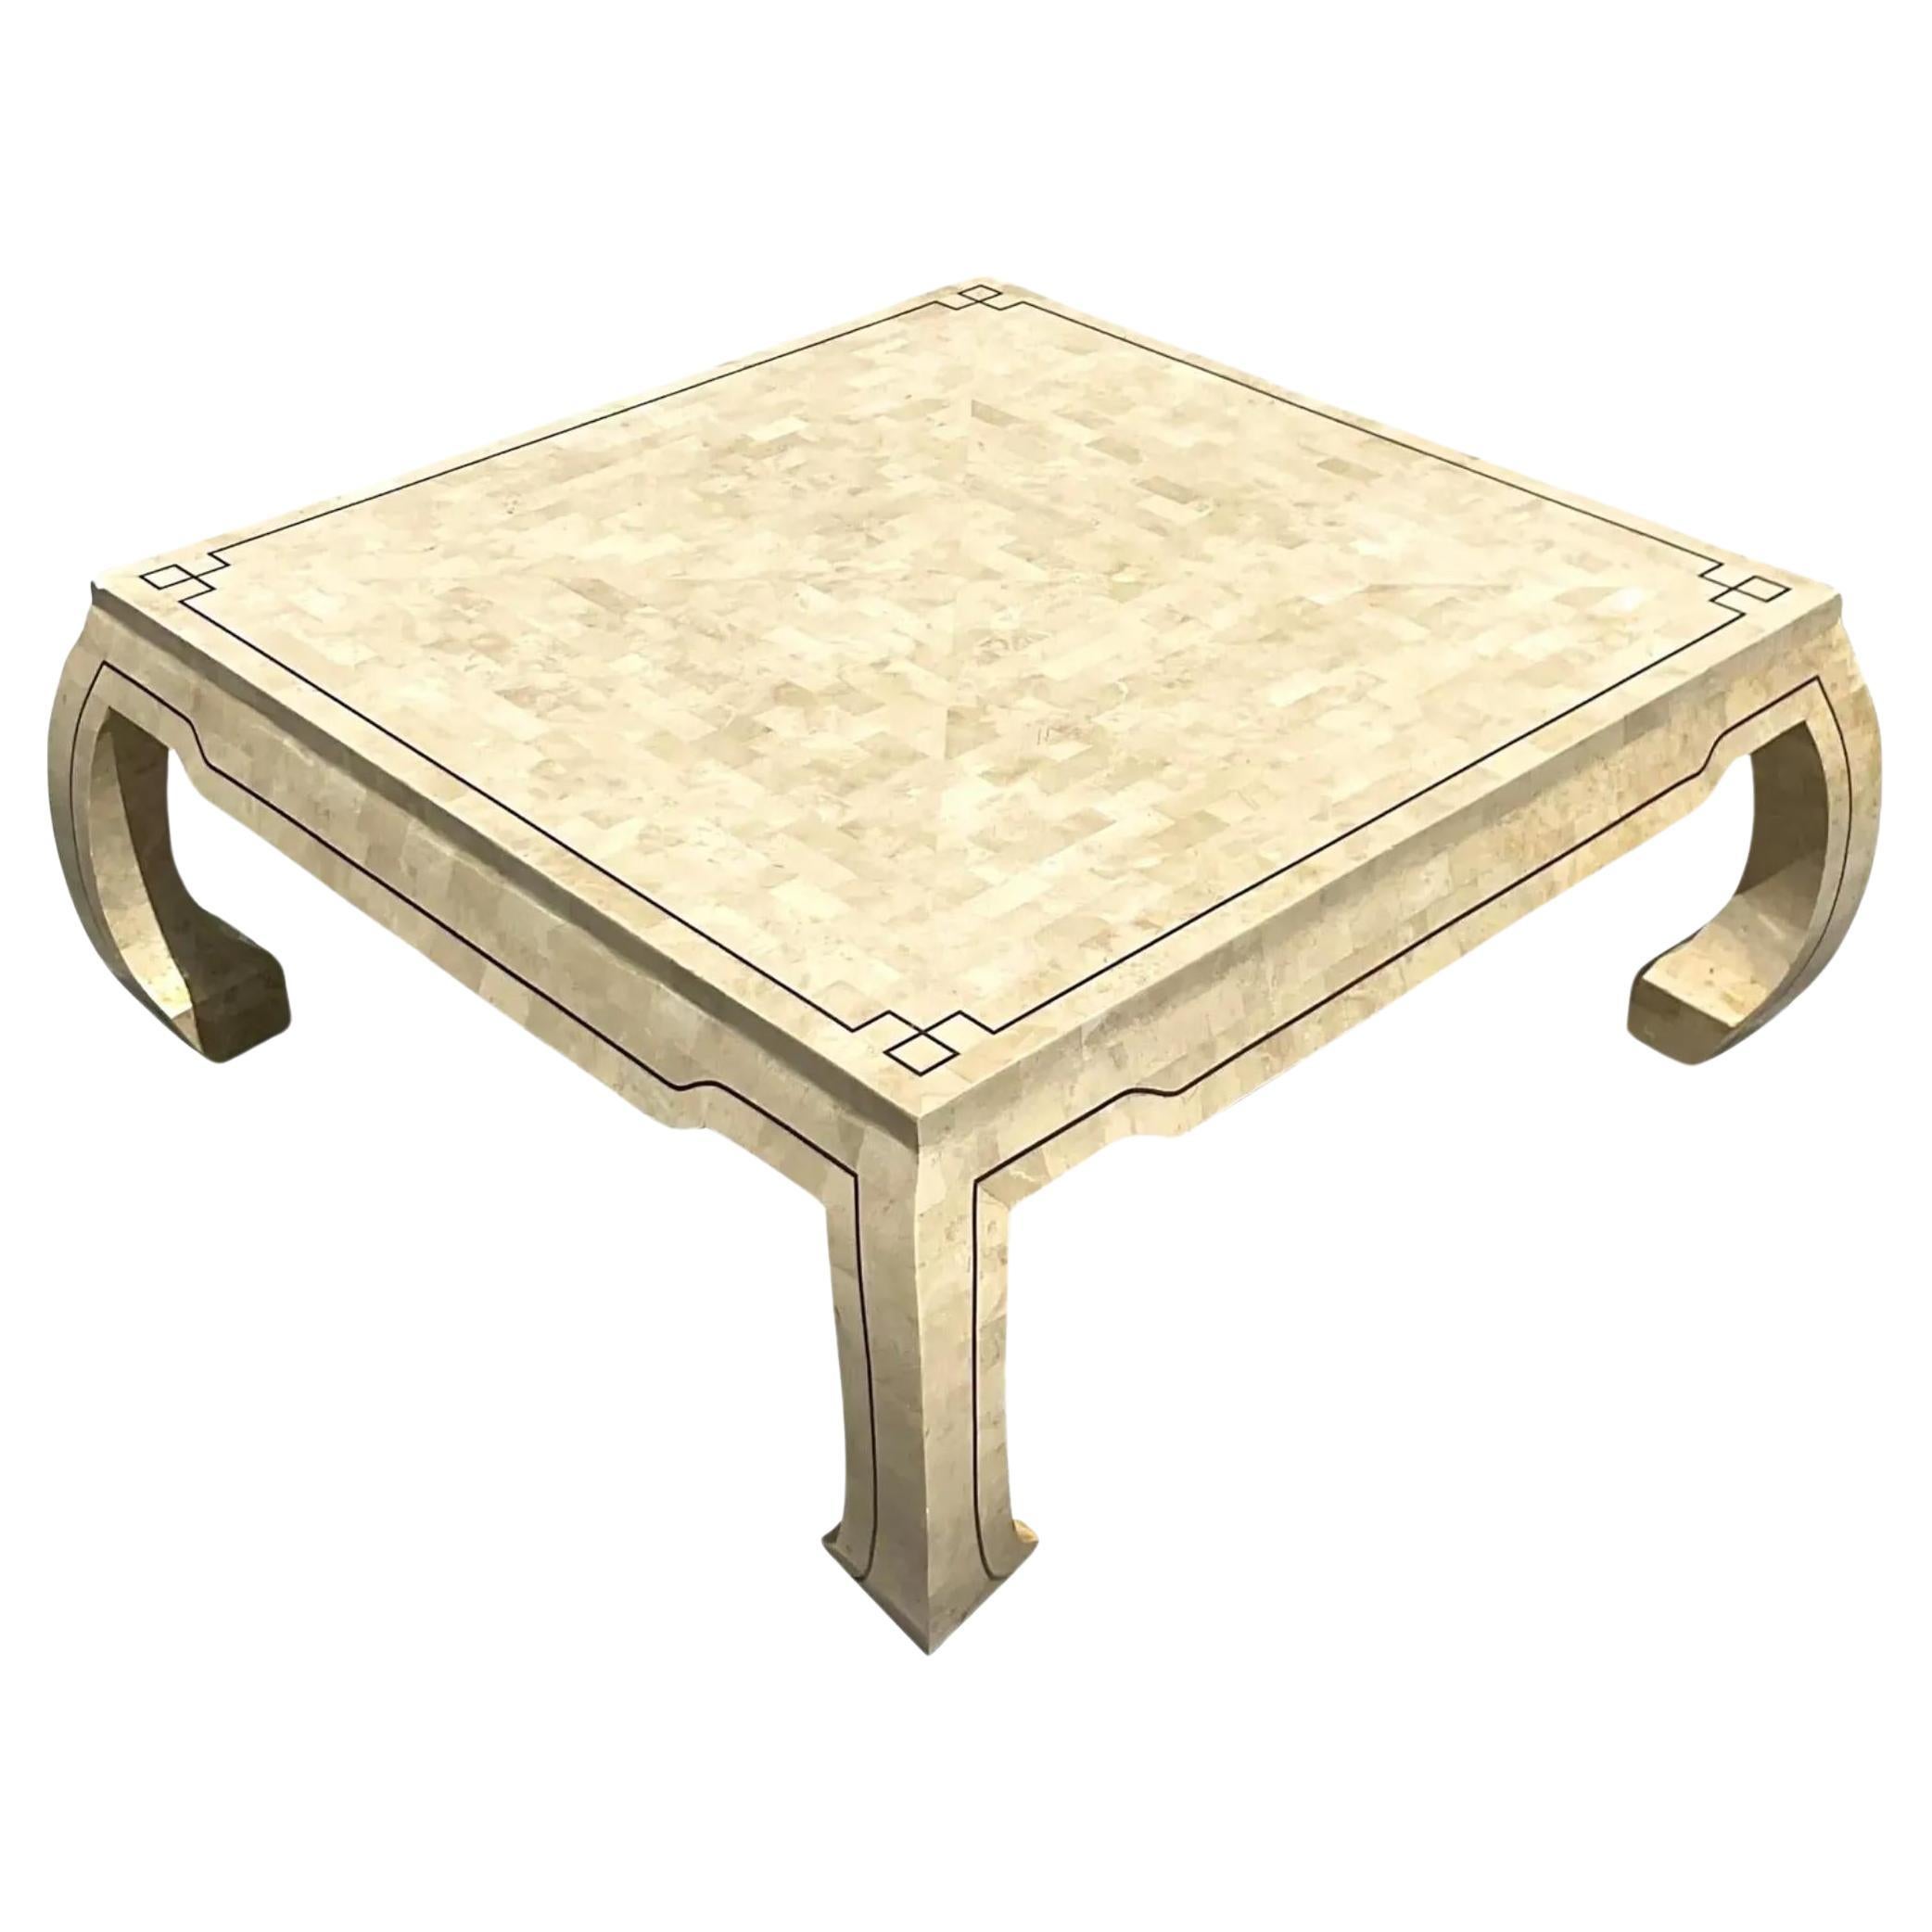 Vintage Regency Tessellated Stone Ming Coffee Table For Sale